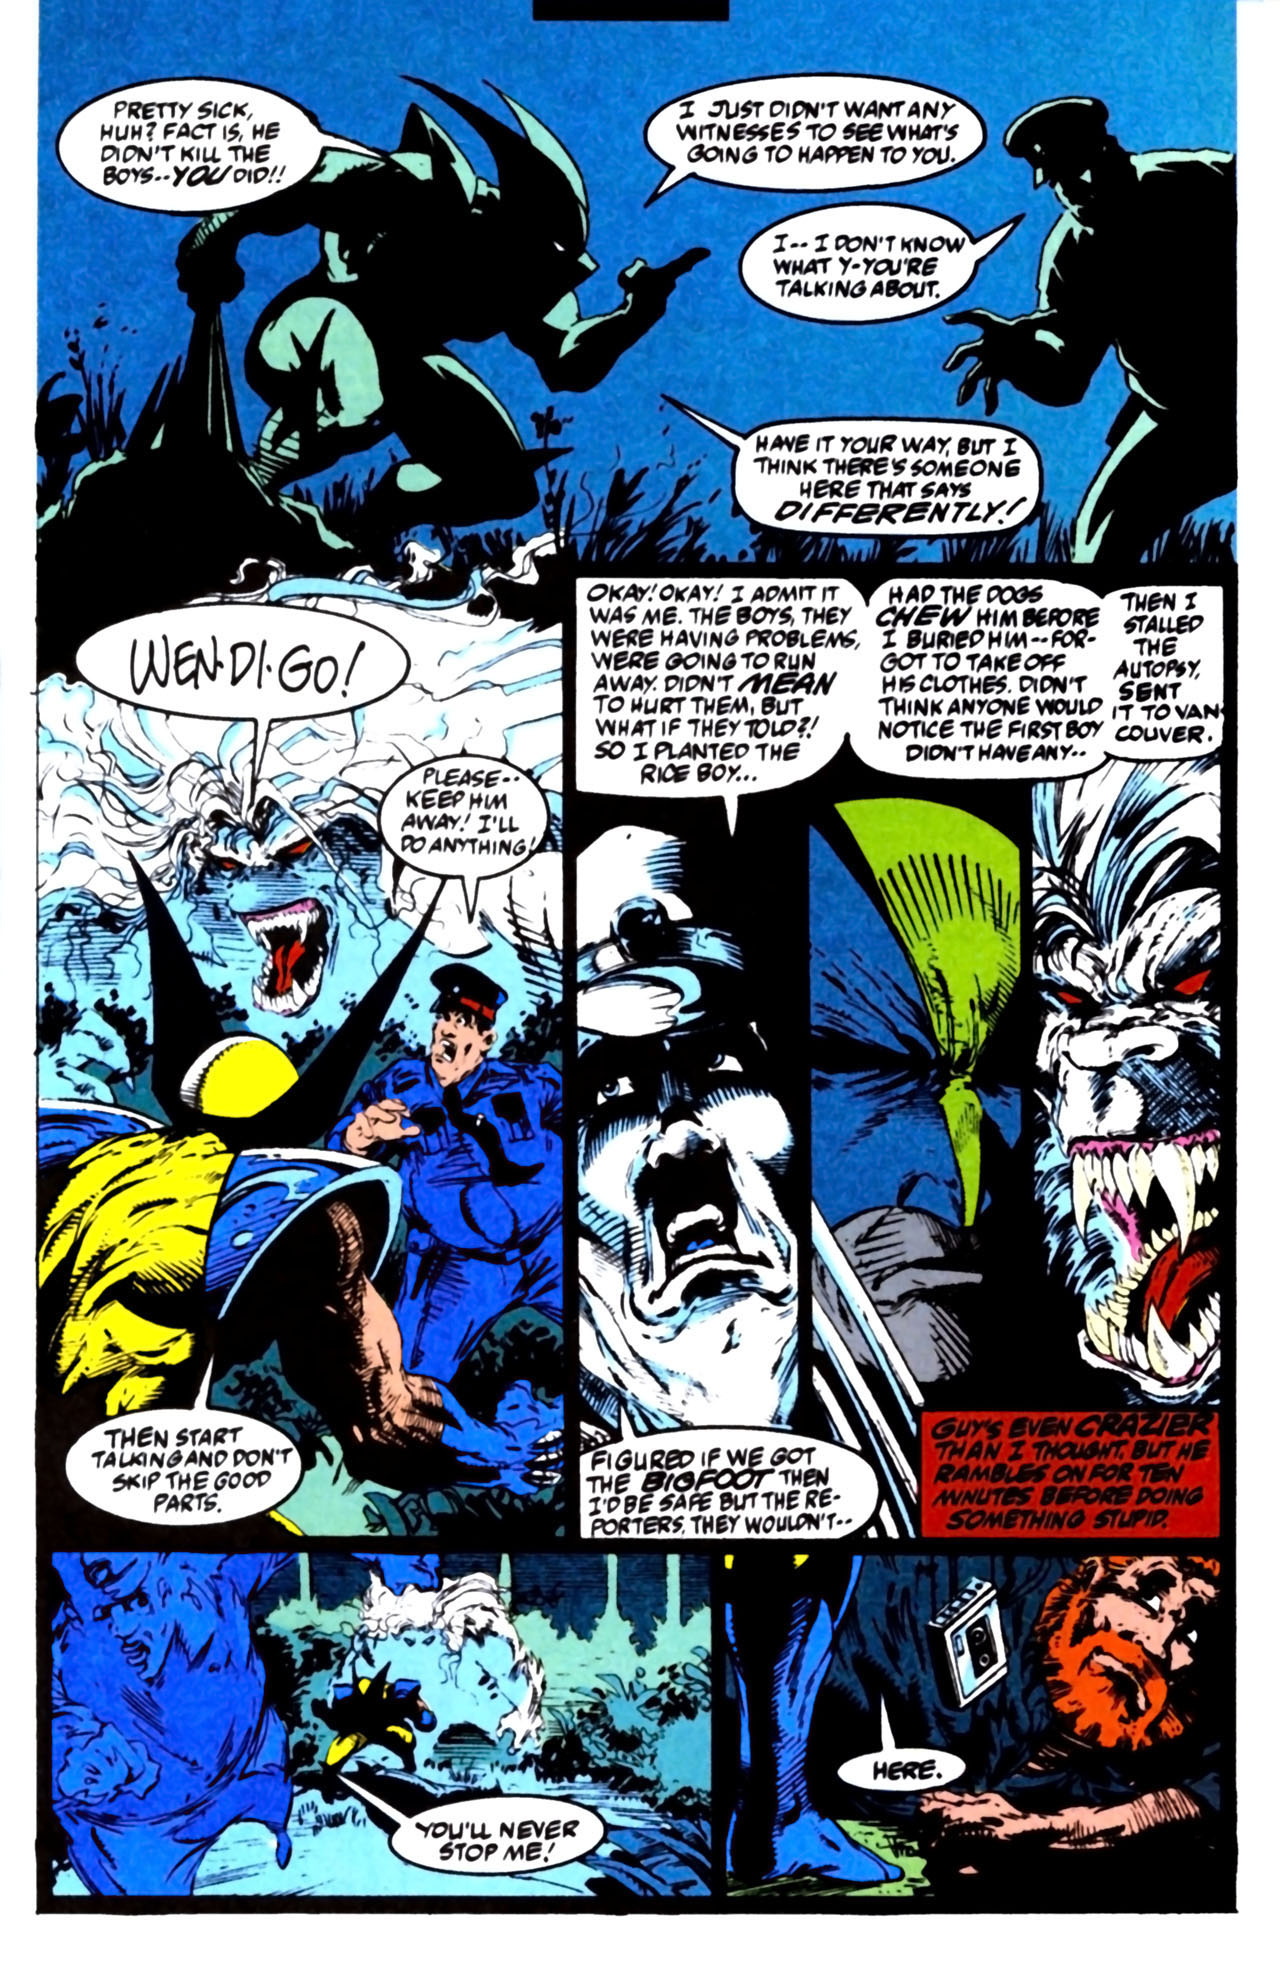 Spider-Man (1990) 12_-_Perceptions_Part_5_of_5 Page 19